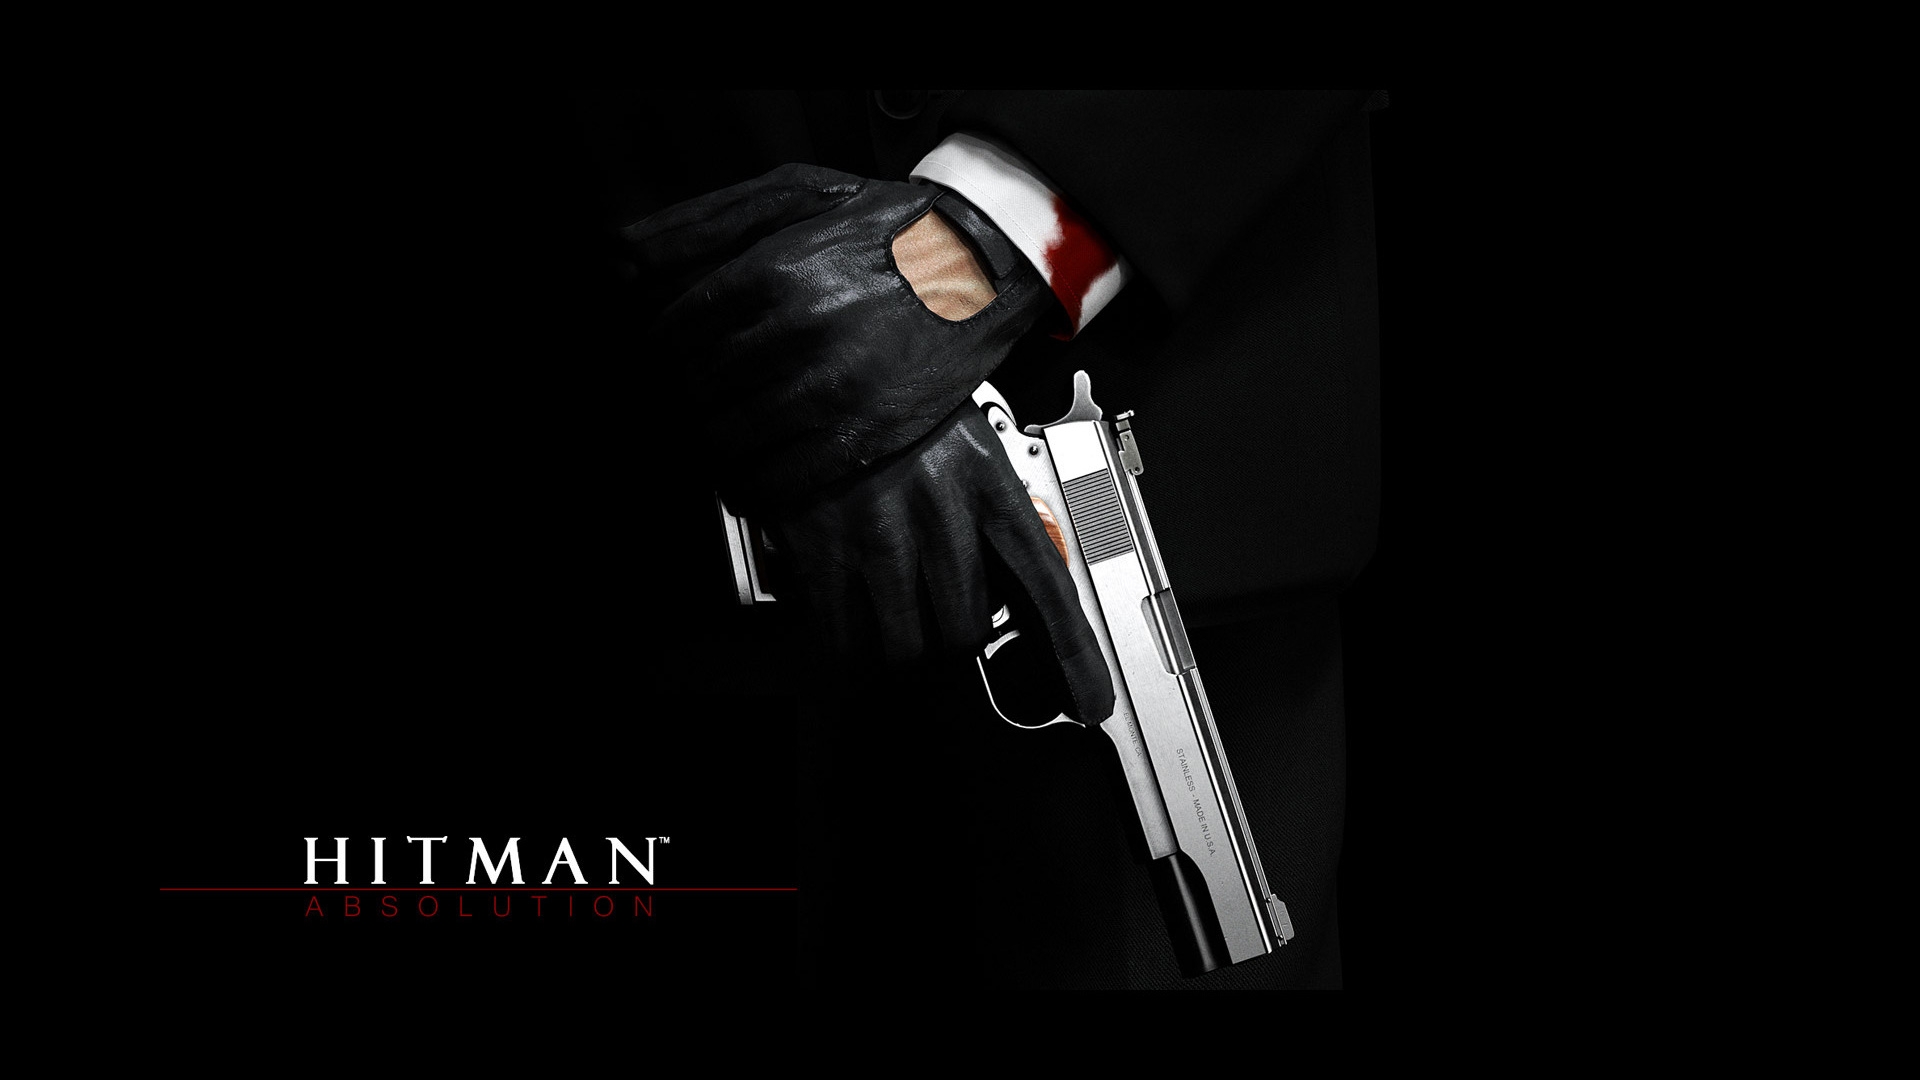  Hitman  Absolution High Definition Wallpapers HD  wallpapers